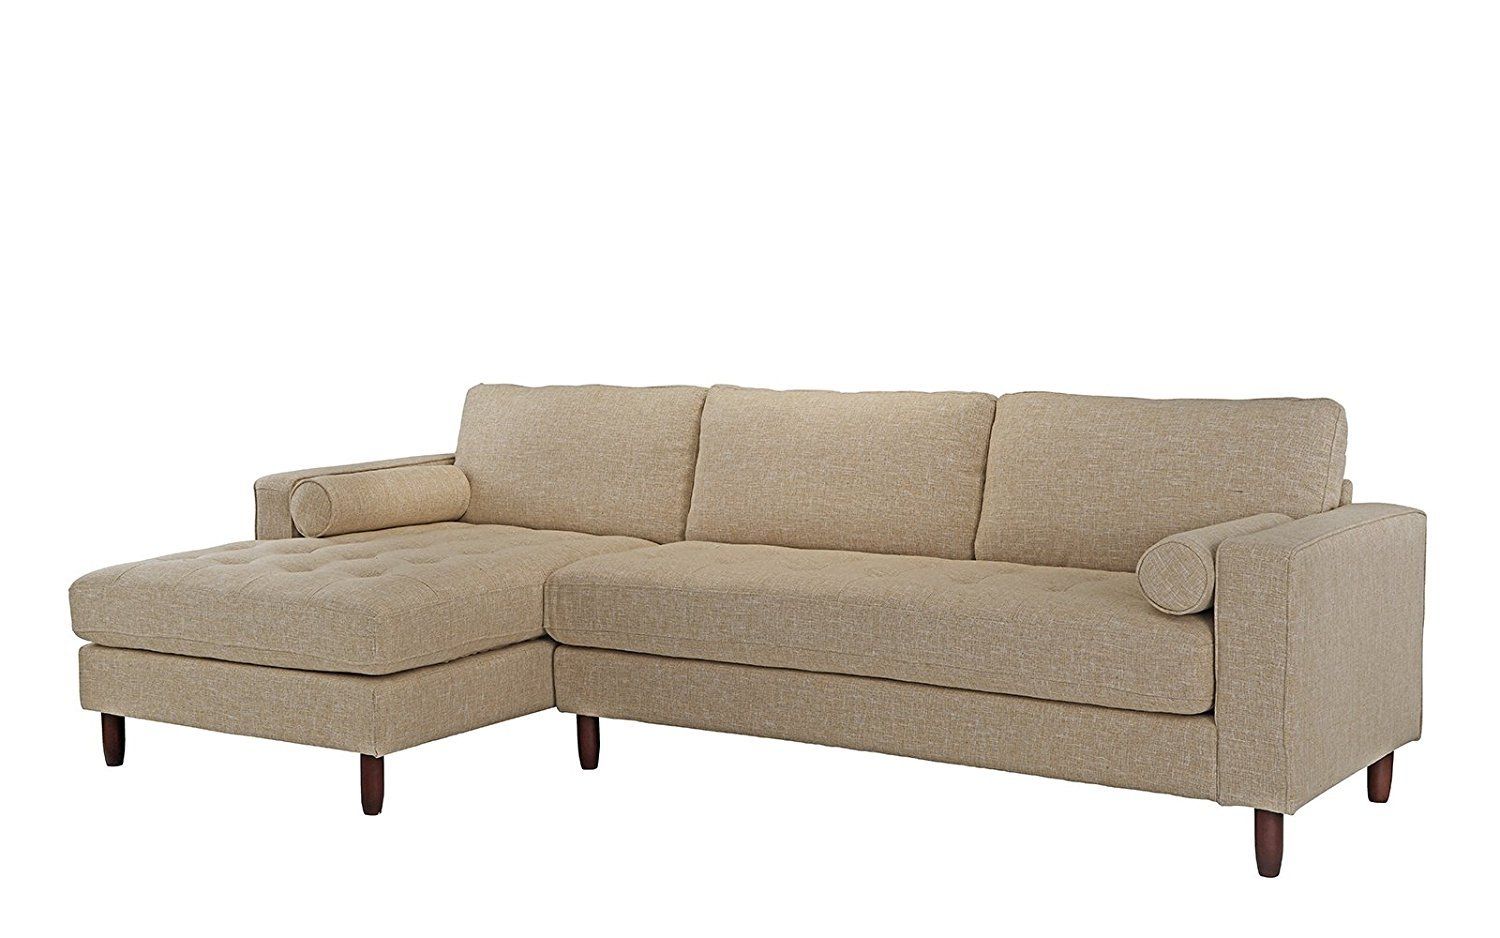 Mid Century Modern Tufted Fabric Sectional Sofa, L Shape Couch Beige In Beige L Shaped Sectional Sofas (Gallery 9 of 20)